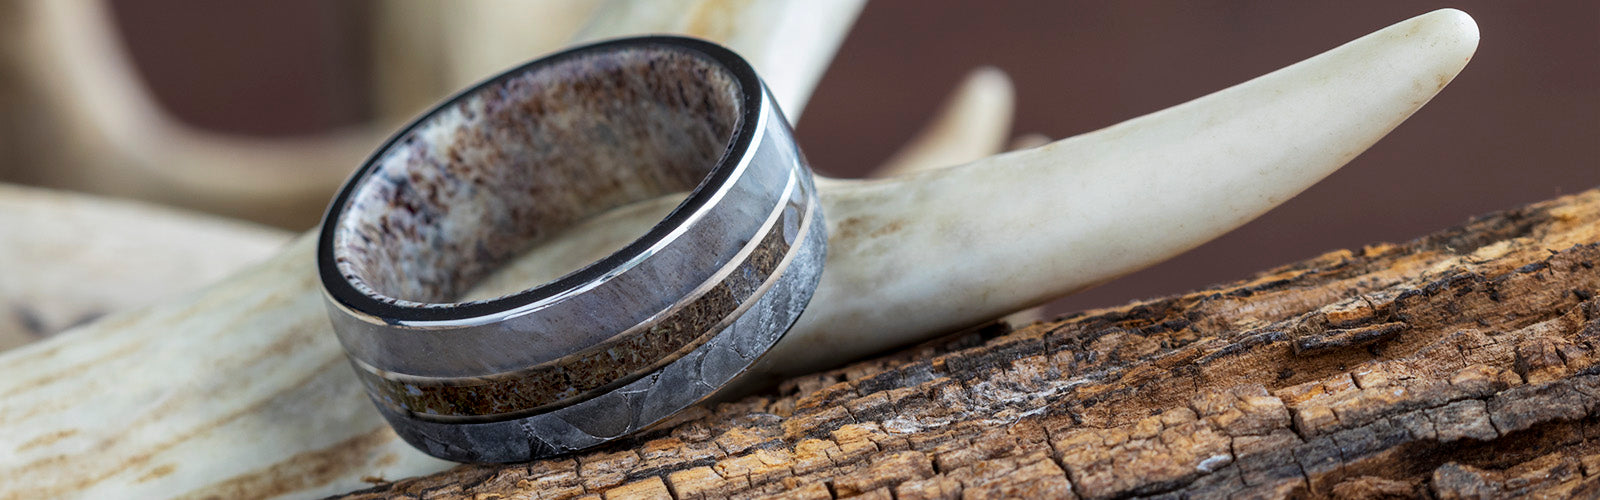 Custom Ring With Antler Inside from Jewelry by Johan